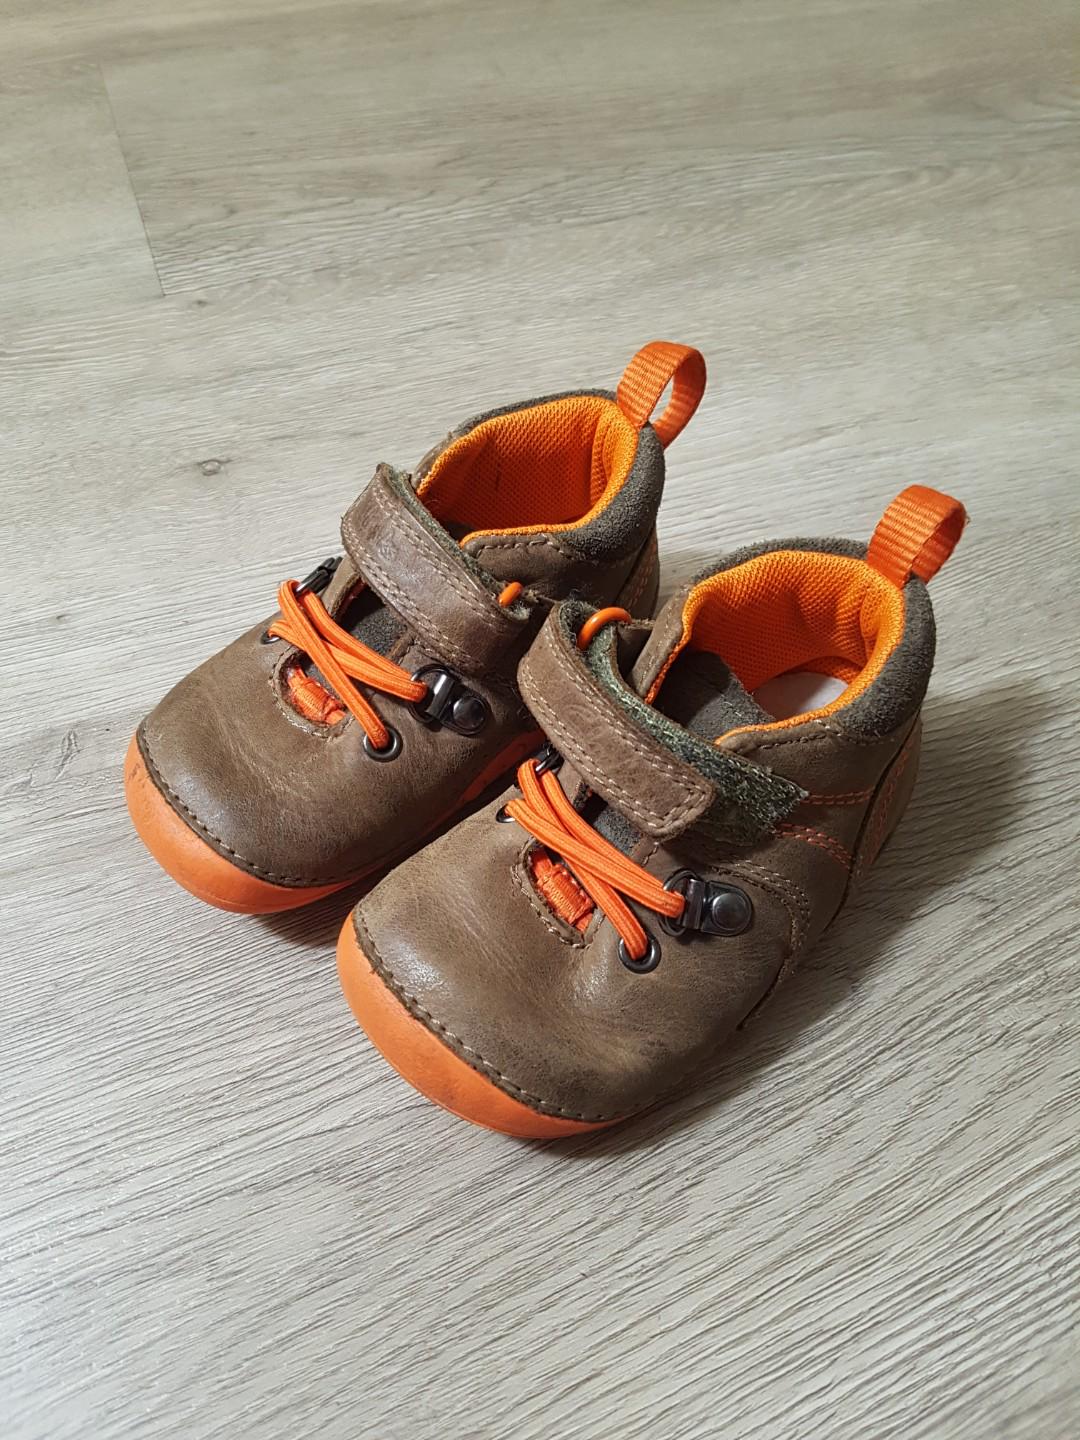 size 3.5 baby shoes